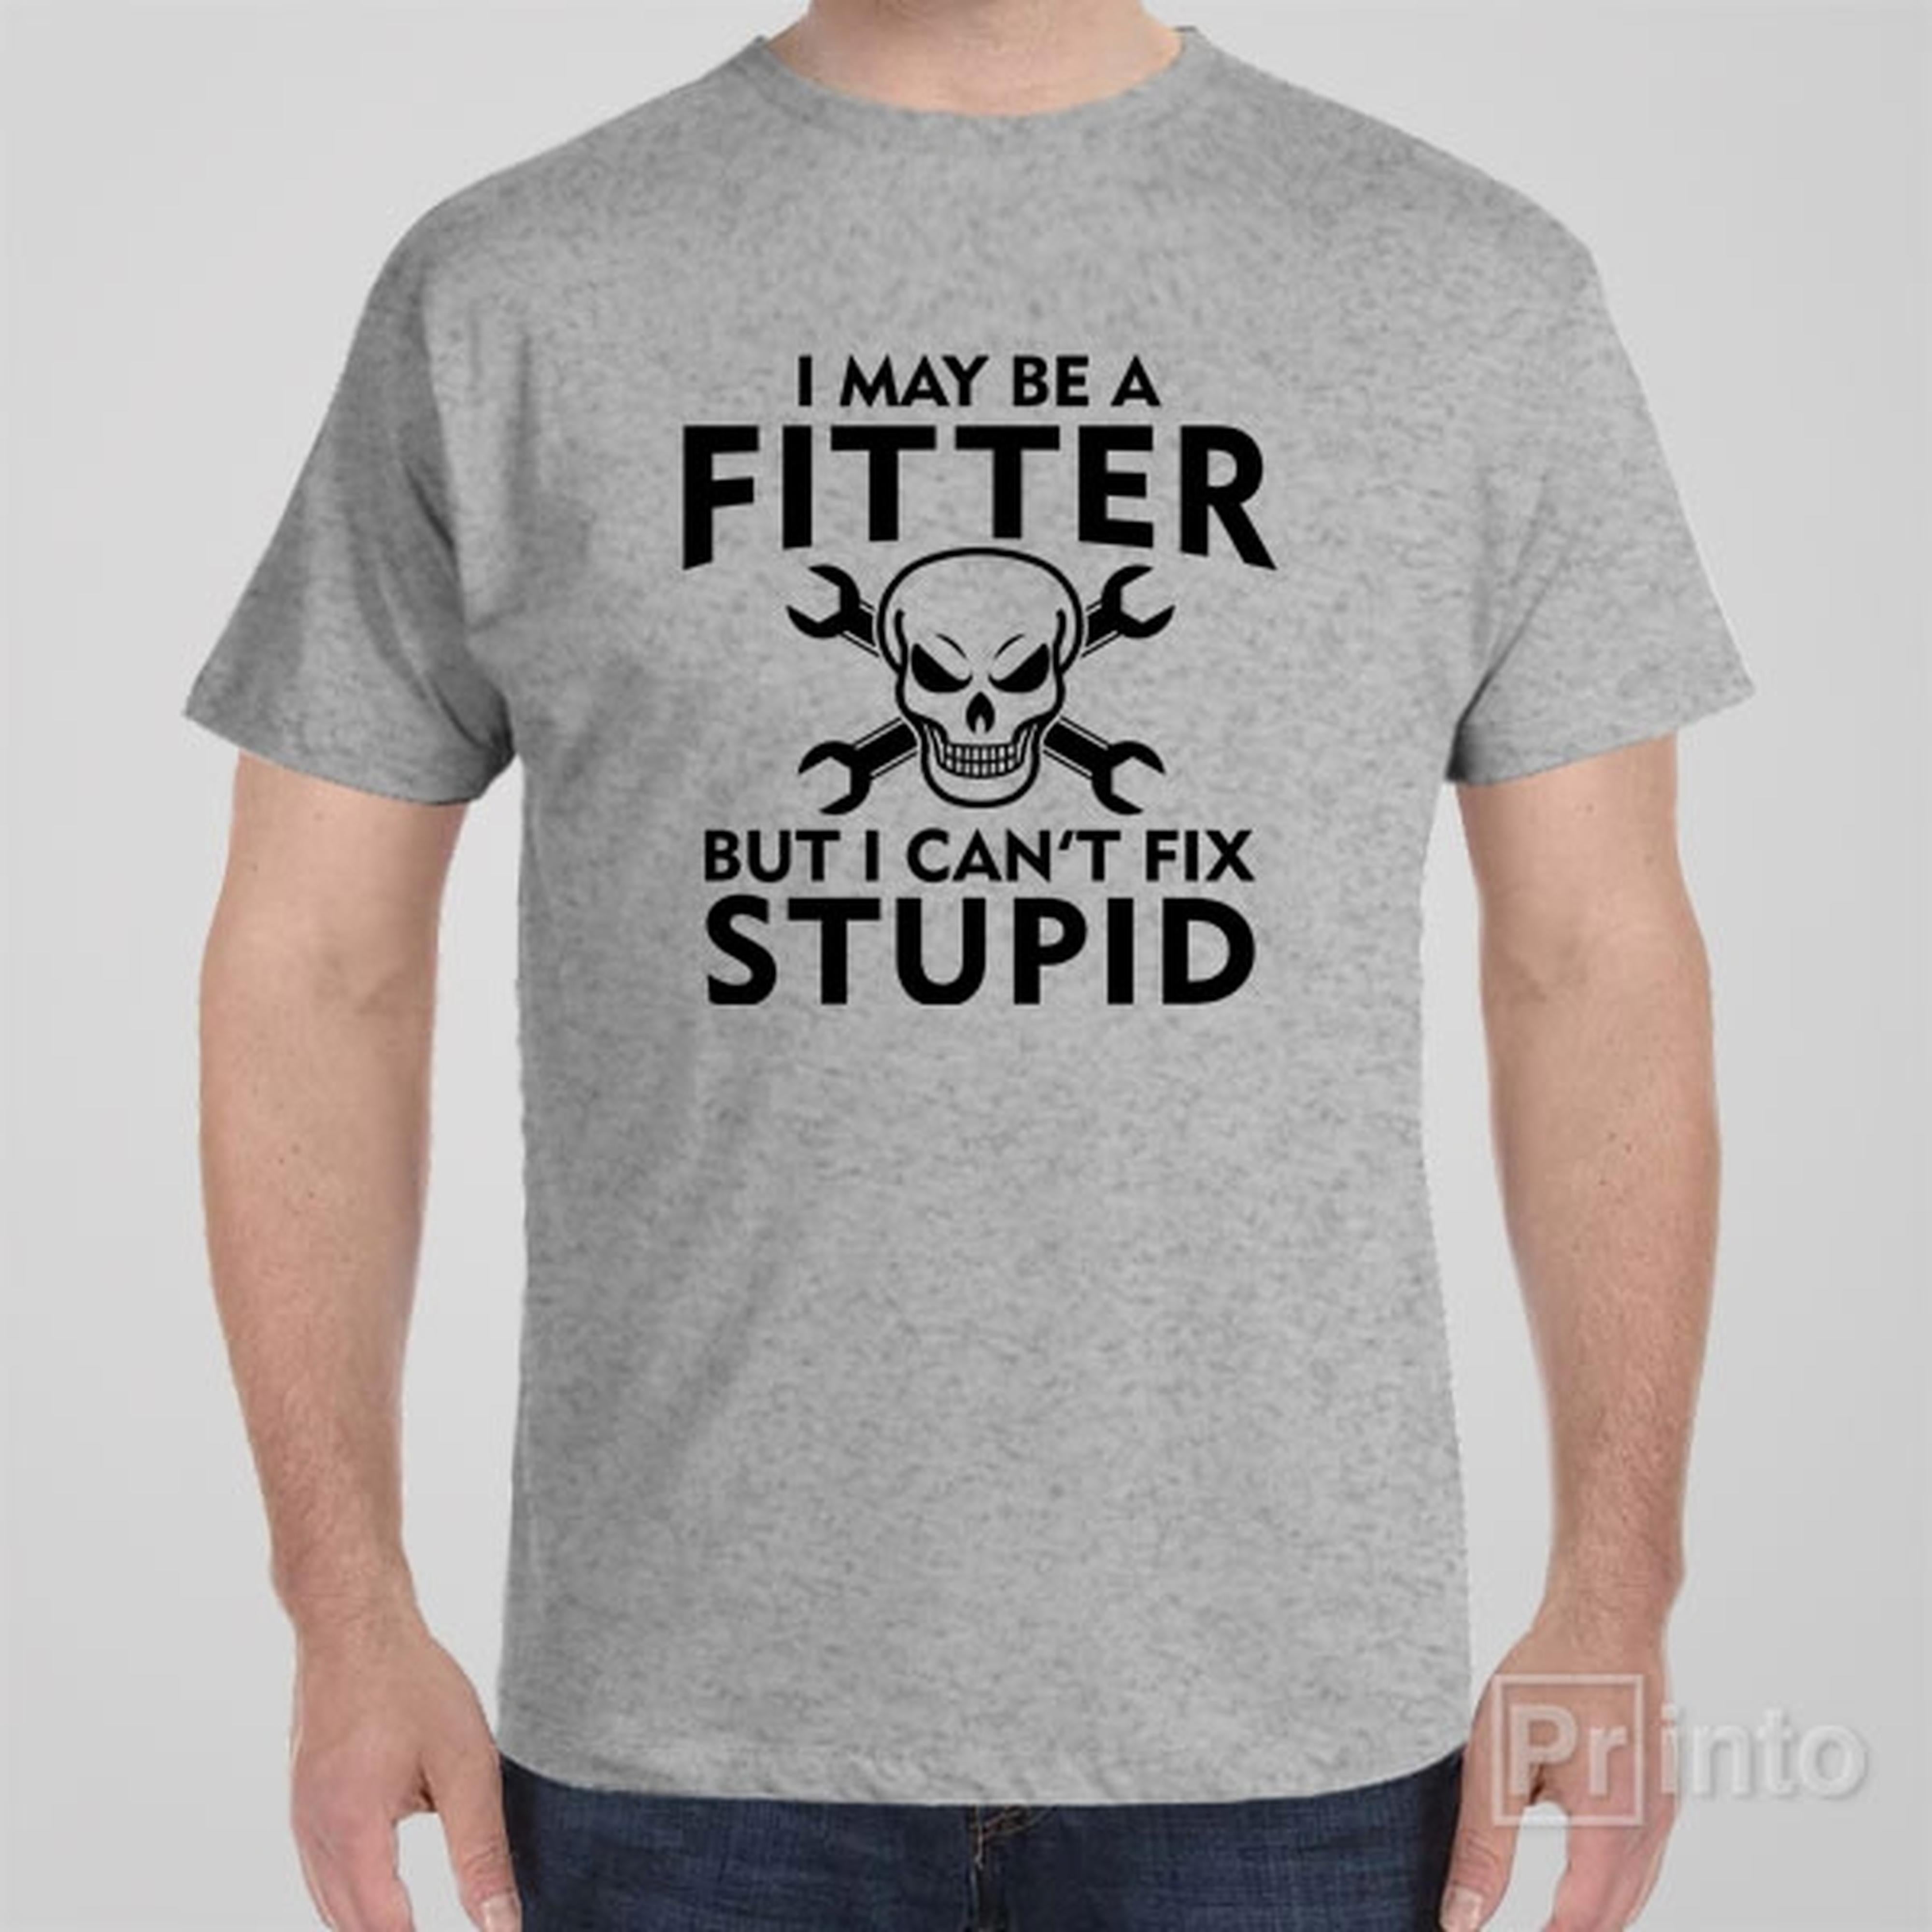 i-may-be-a-fitter-but-i-cant-fix-stupid-t-shirt